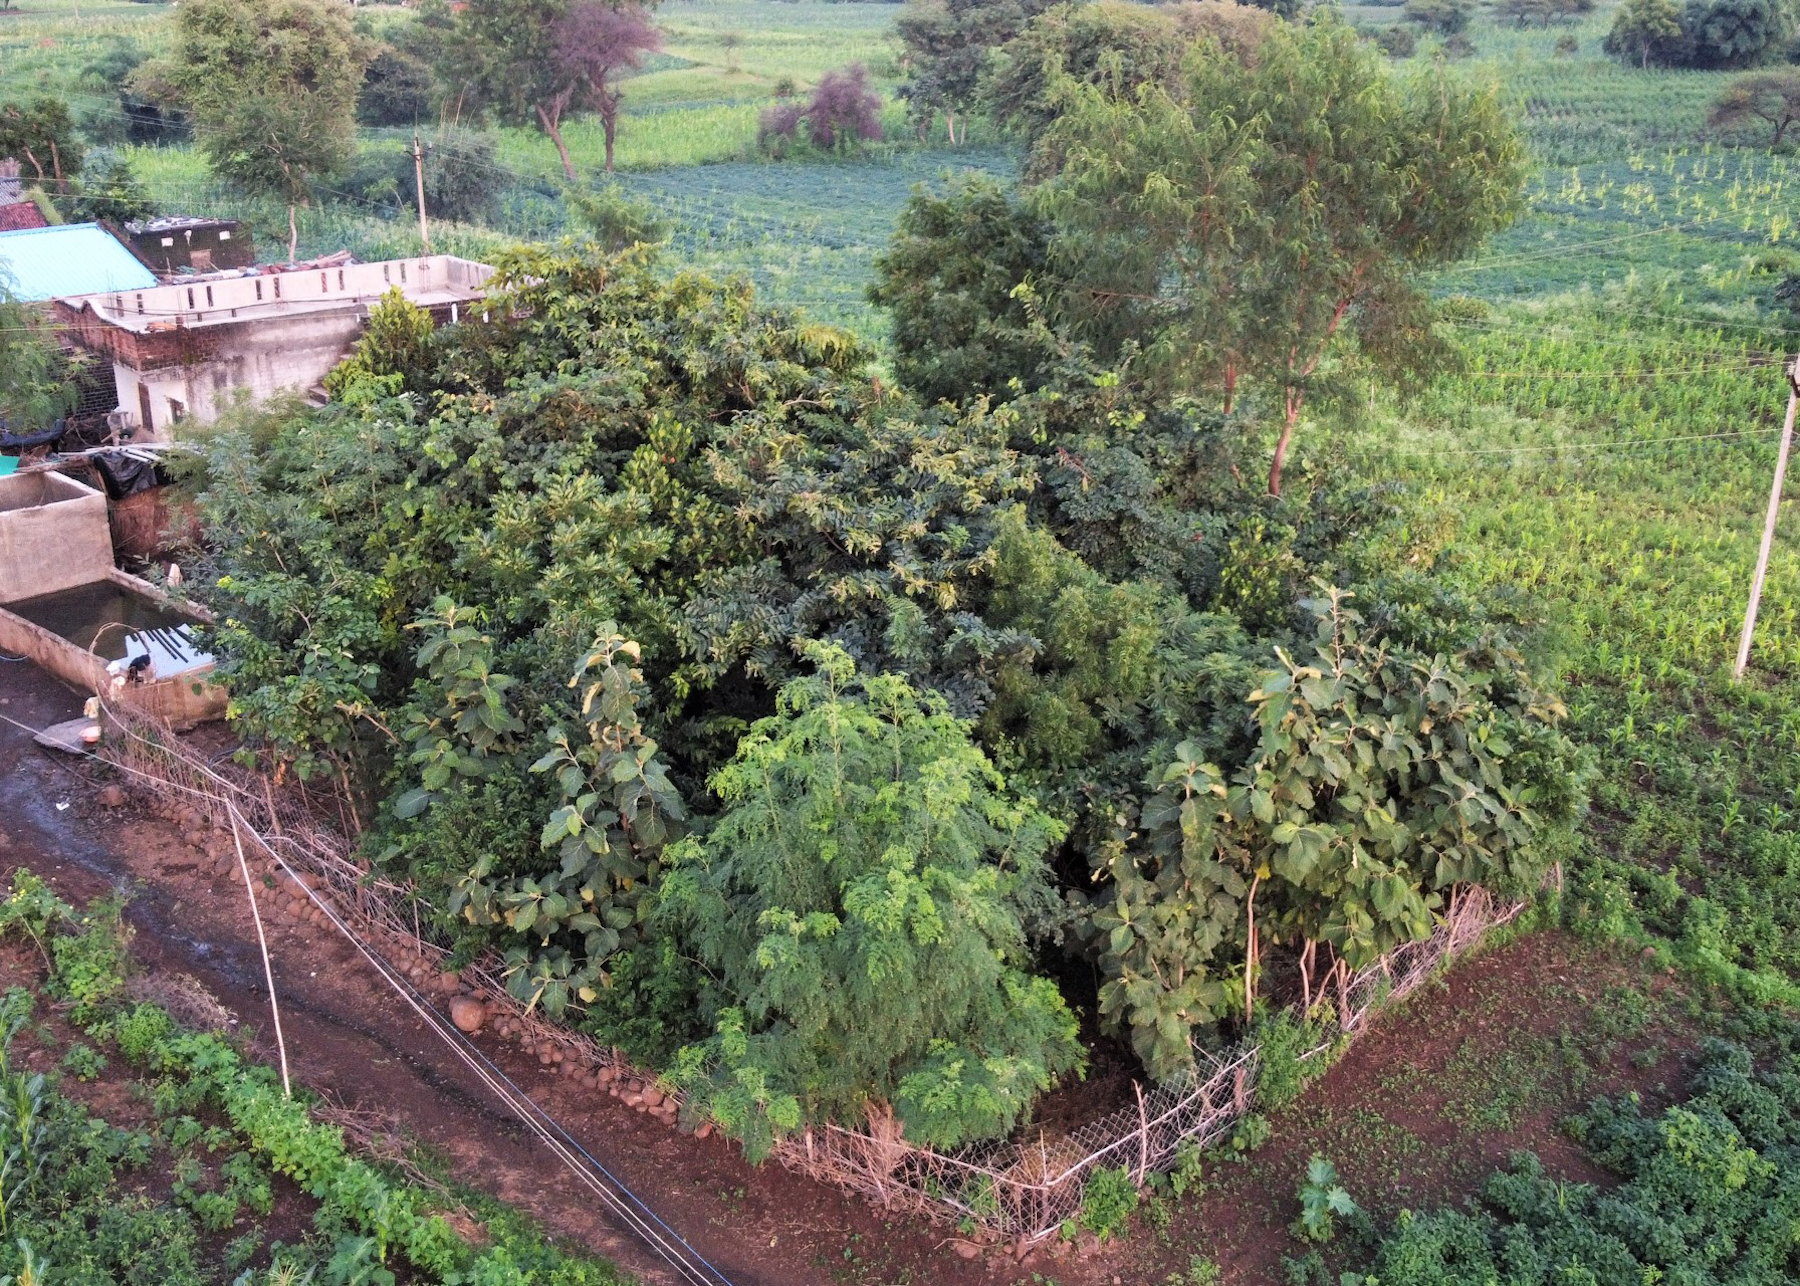 Aerial view of a micro-forest in Madhya Pradesh, India.